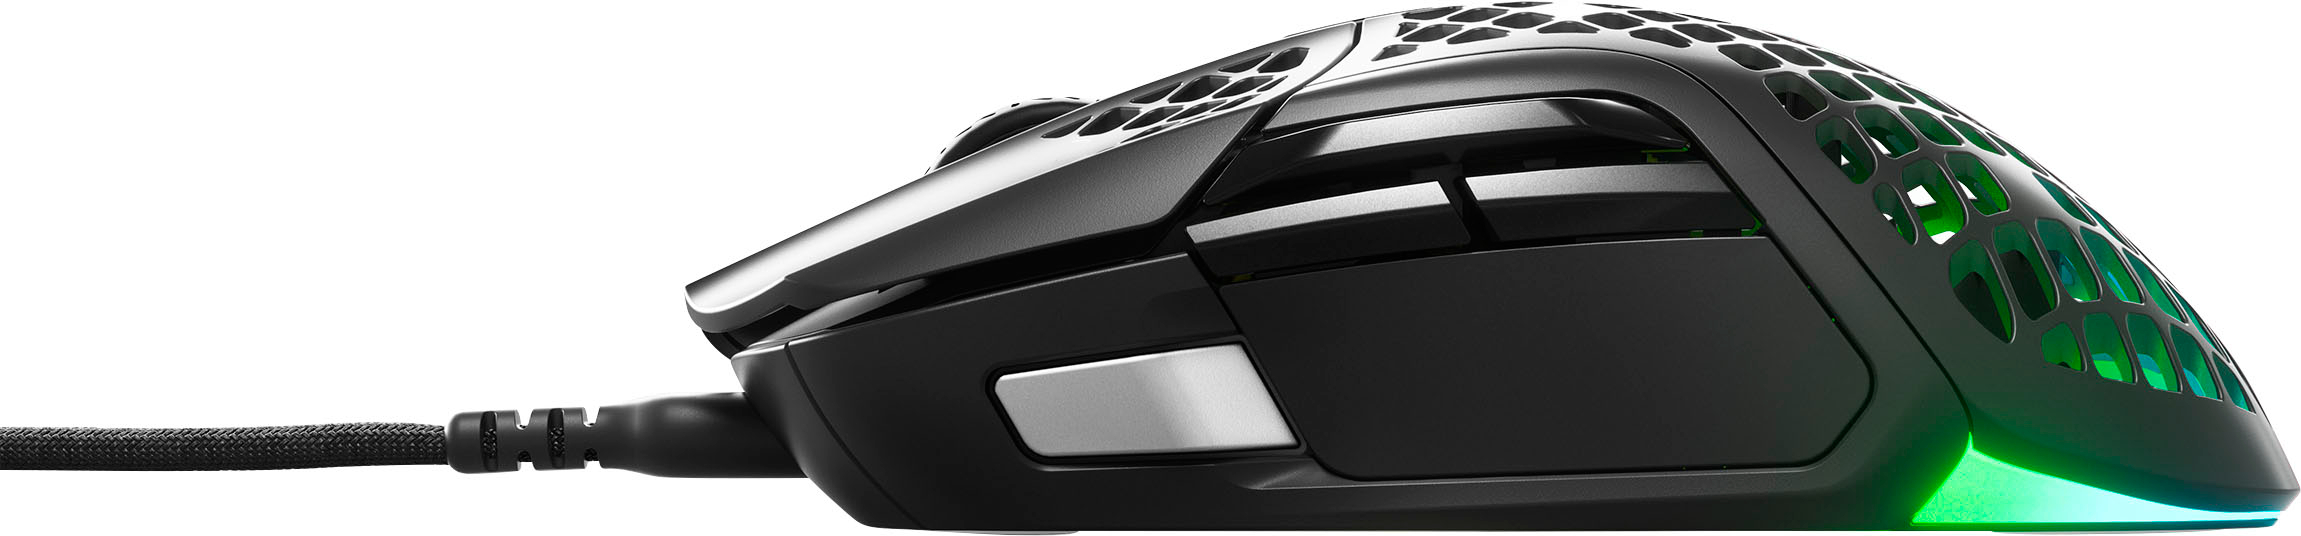 Left View: SteelSeries - Aerox 5 Lightweight Wired Optical Gaming Mouse With 9 Programmble Buttons - Black